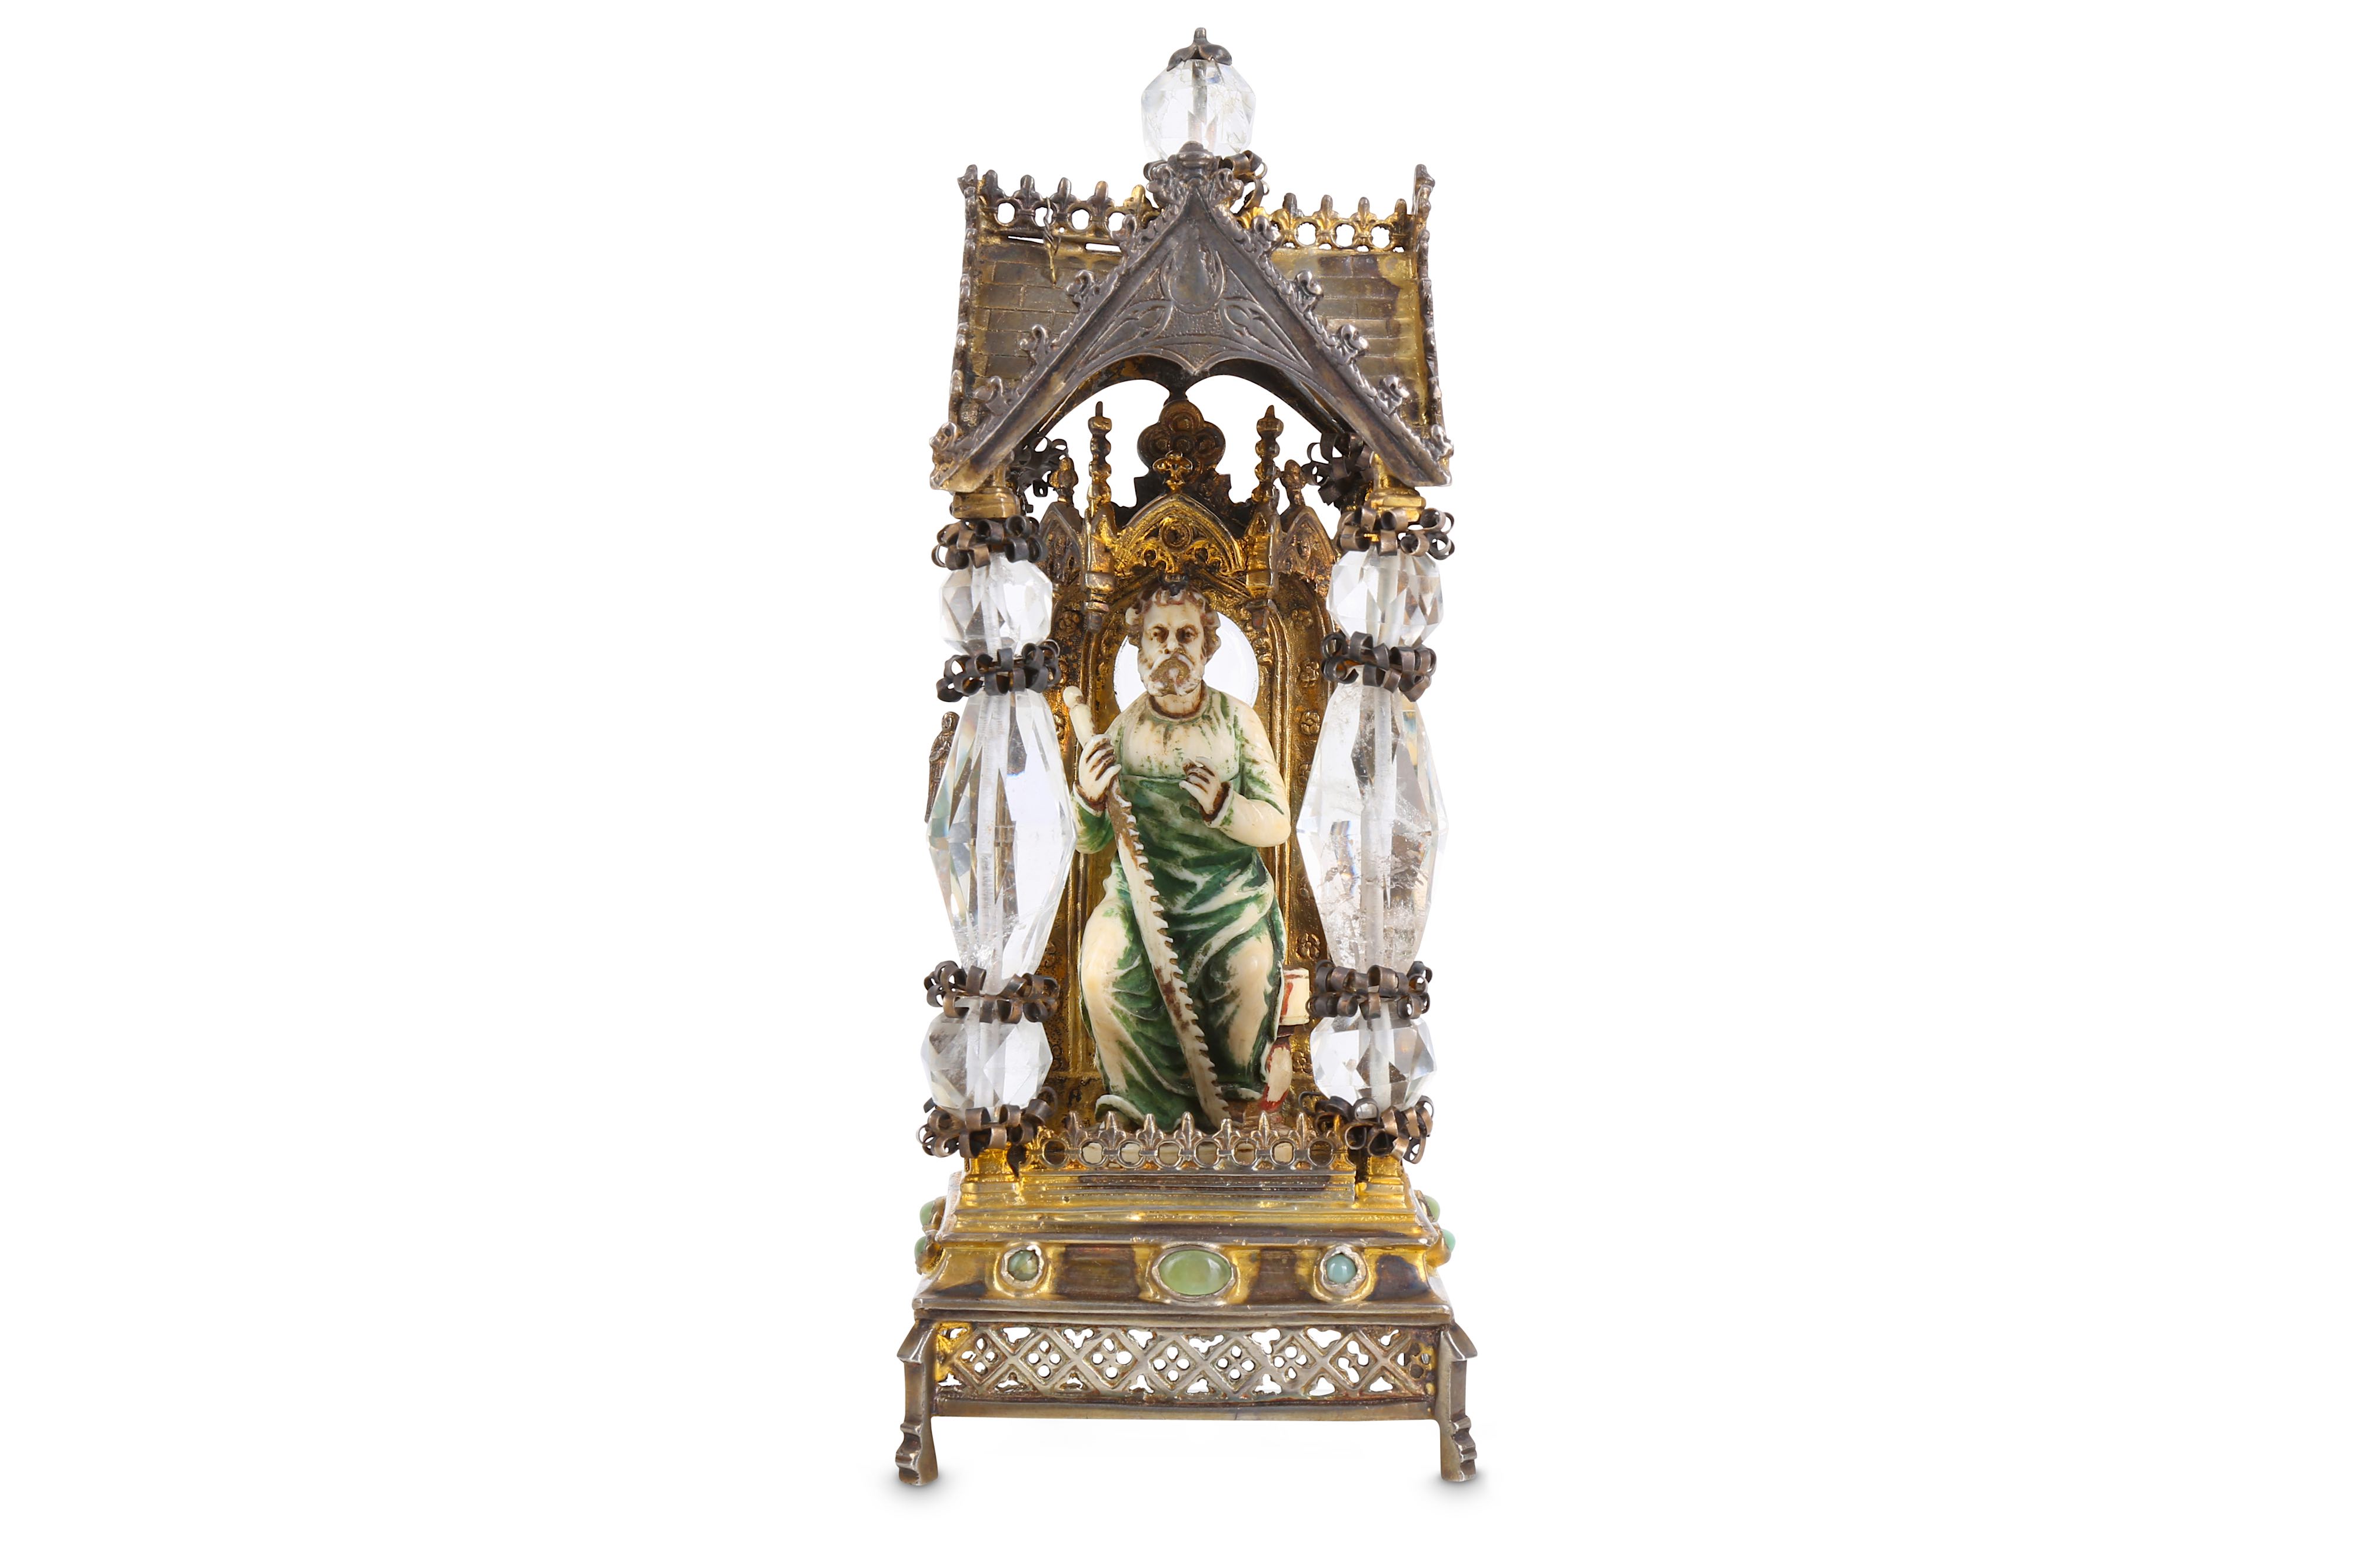 A 19TH CENTURY SILVER GILT, ROCK CRYSTAL AND IVORY RELIQUARY OF SAINT SIMON THE ZEALOT